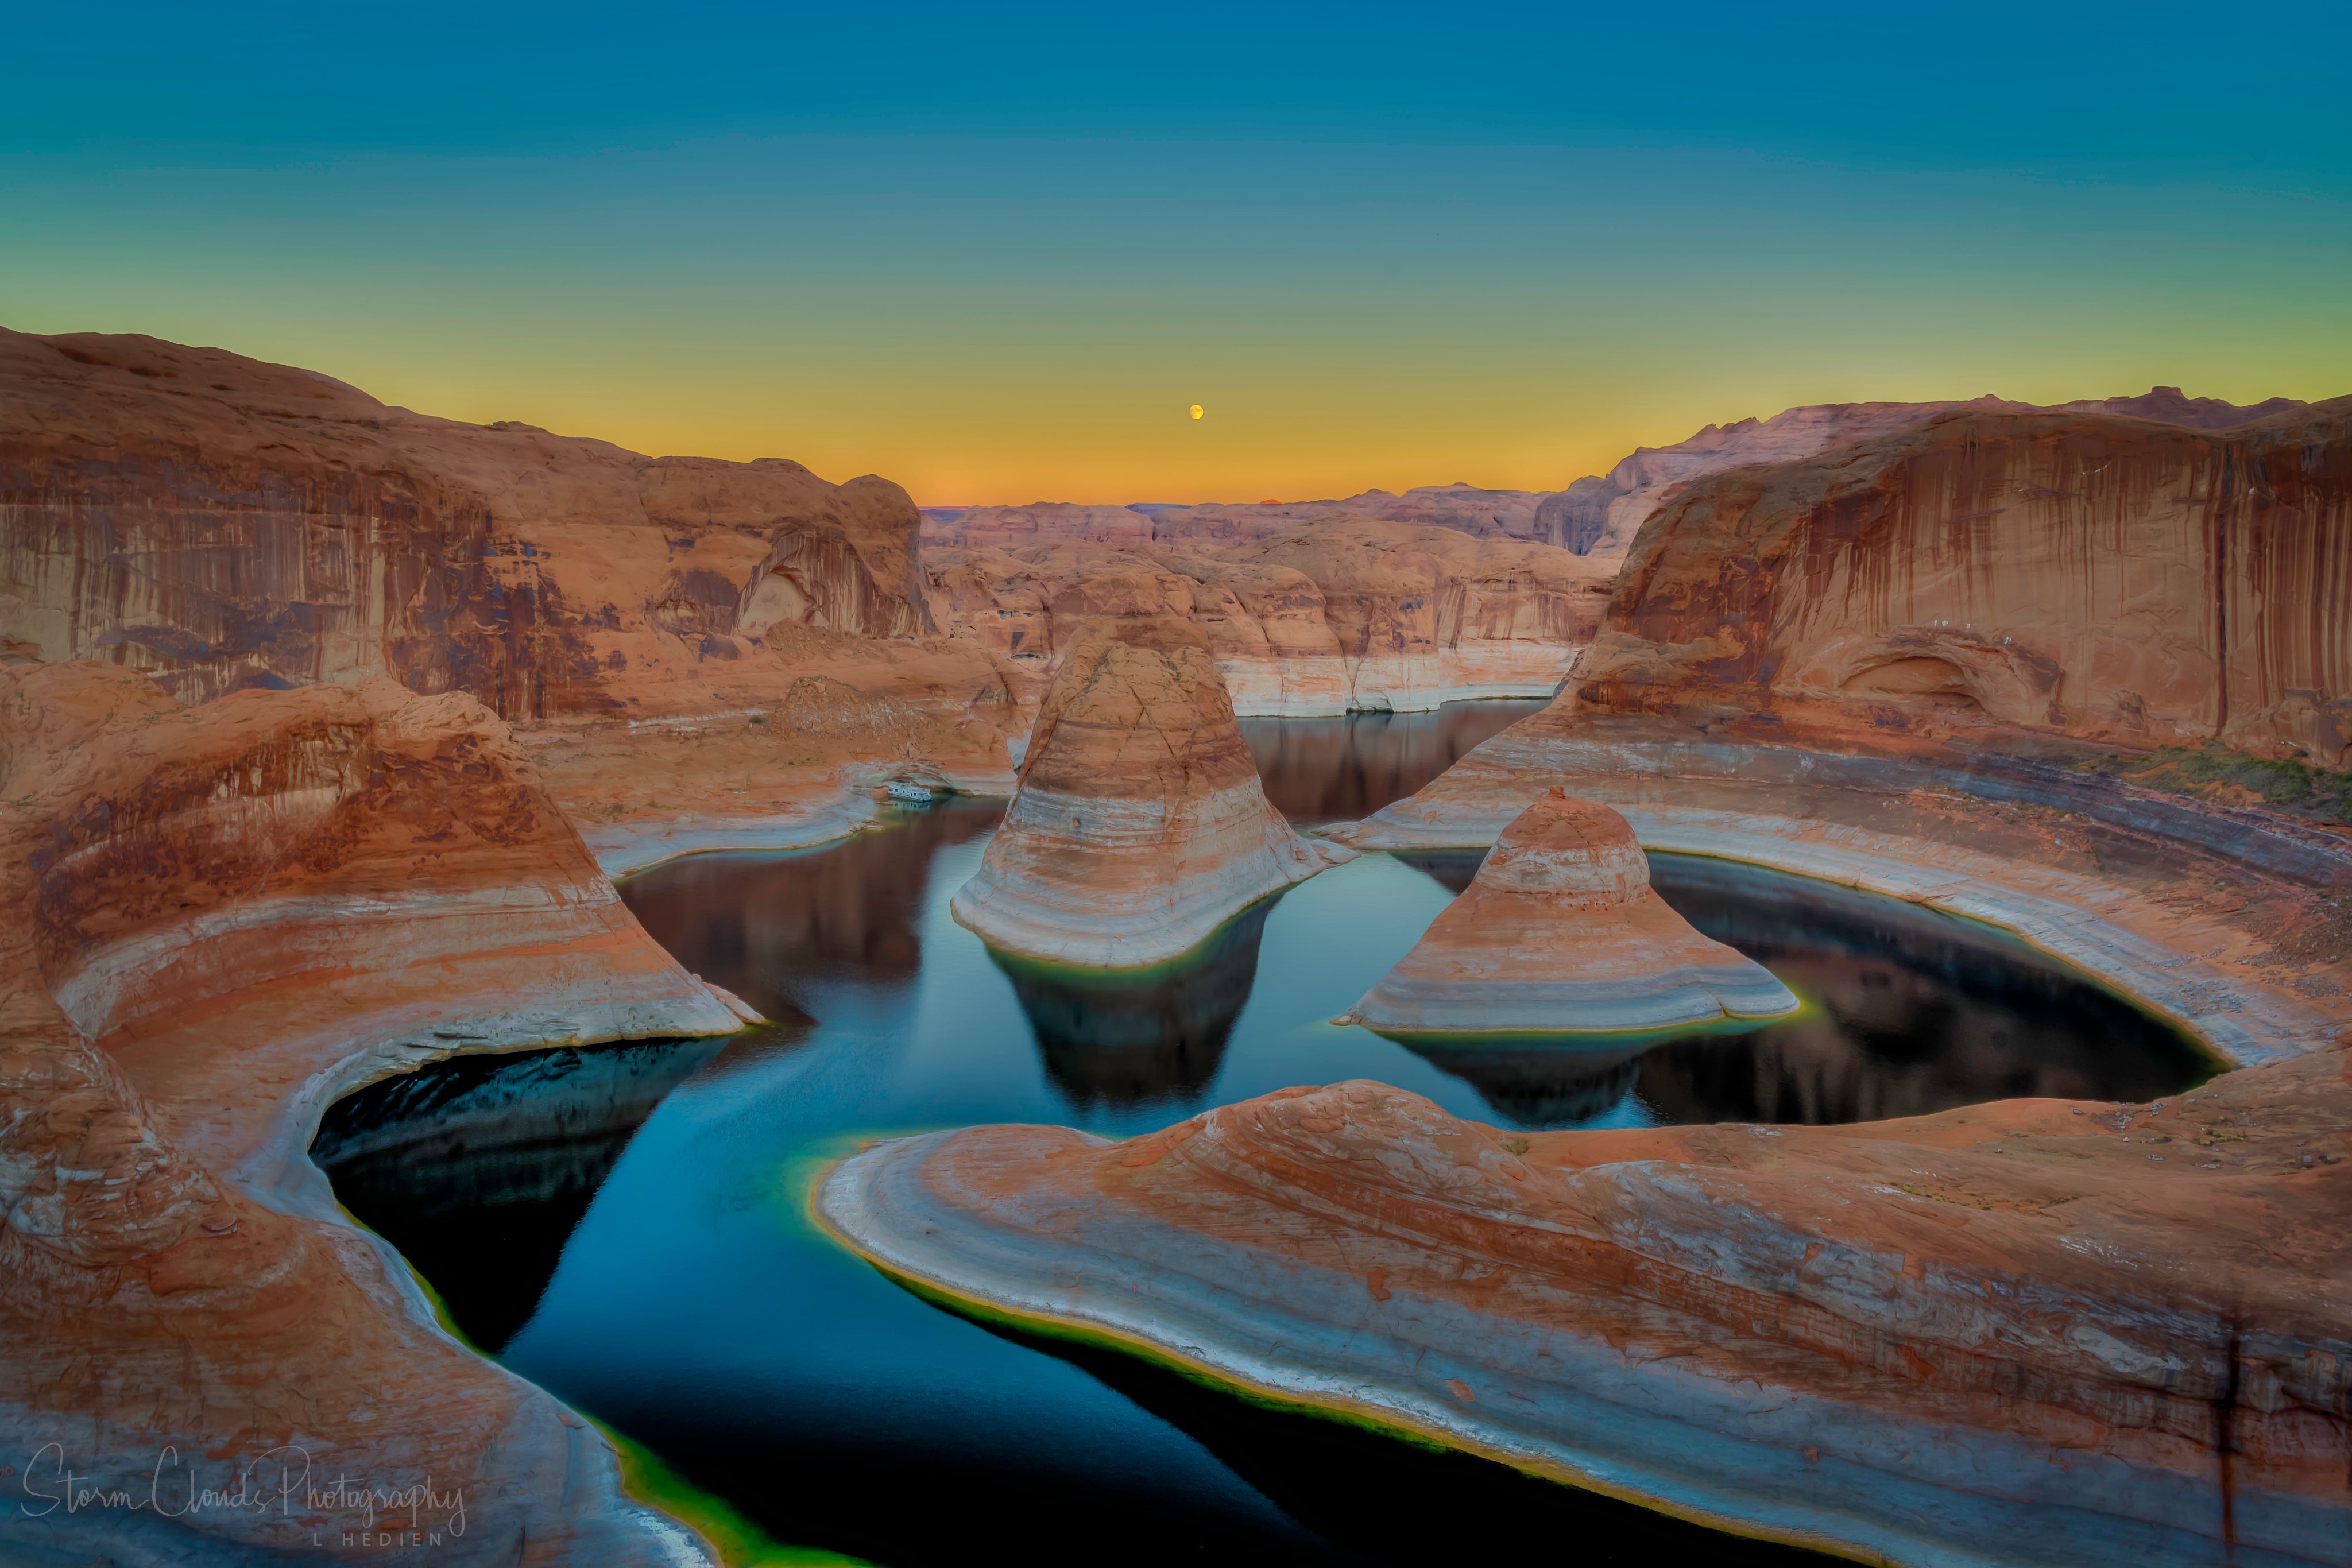 3rd Place Reflection Canyon in Utah by Laura Hedien @lhedien